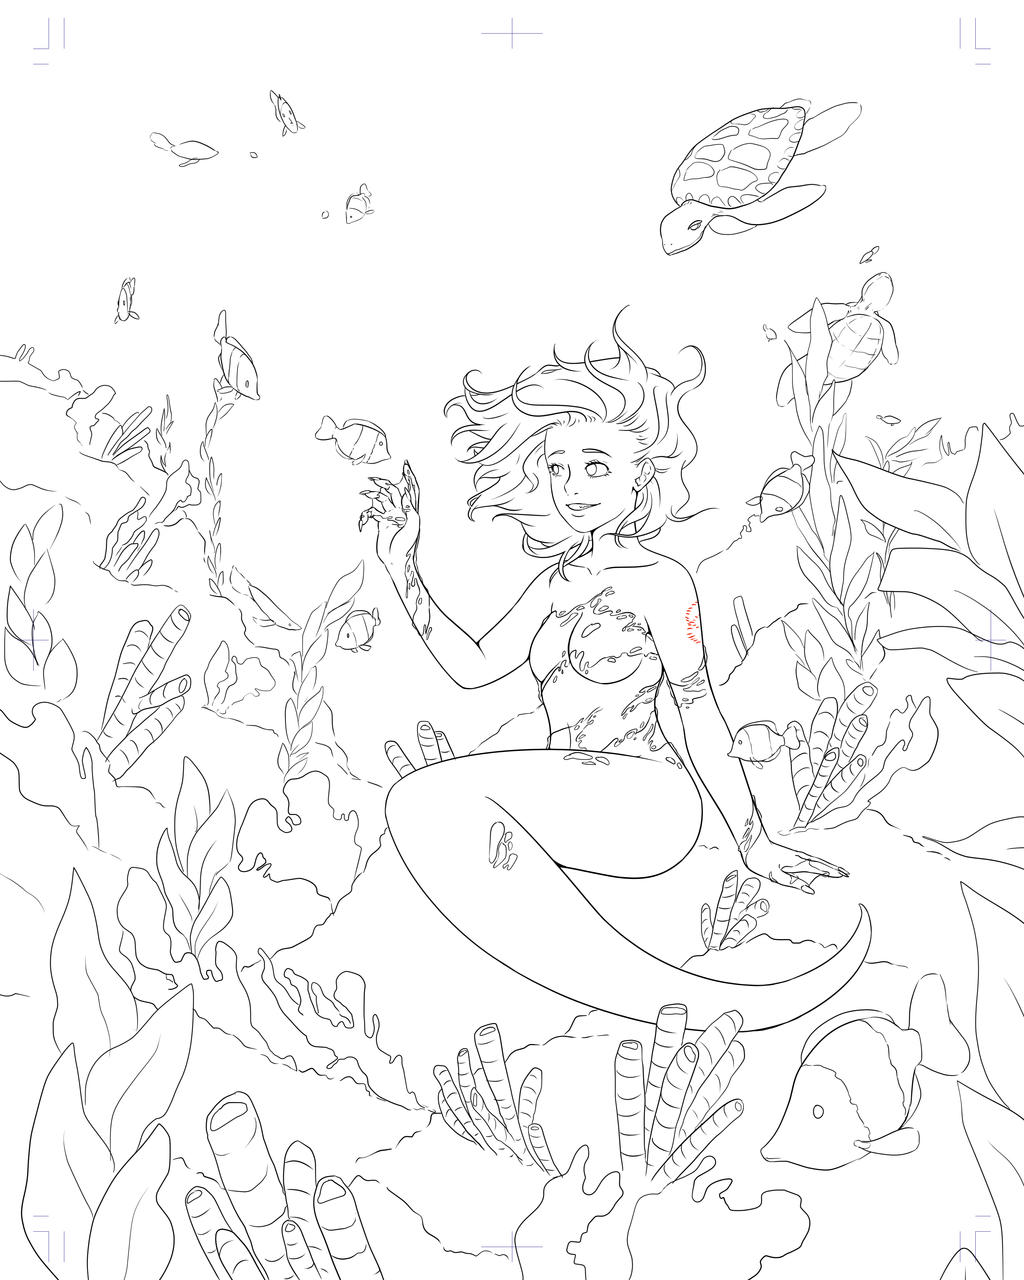 Siren Commission Lineart!